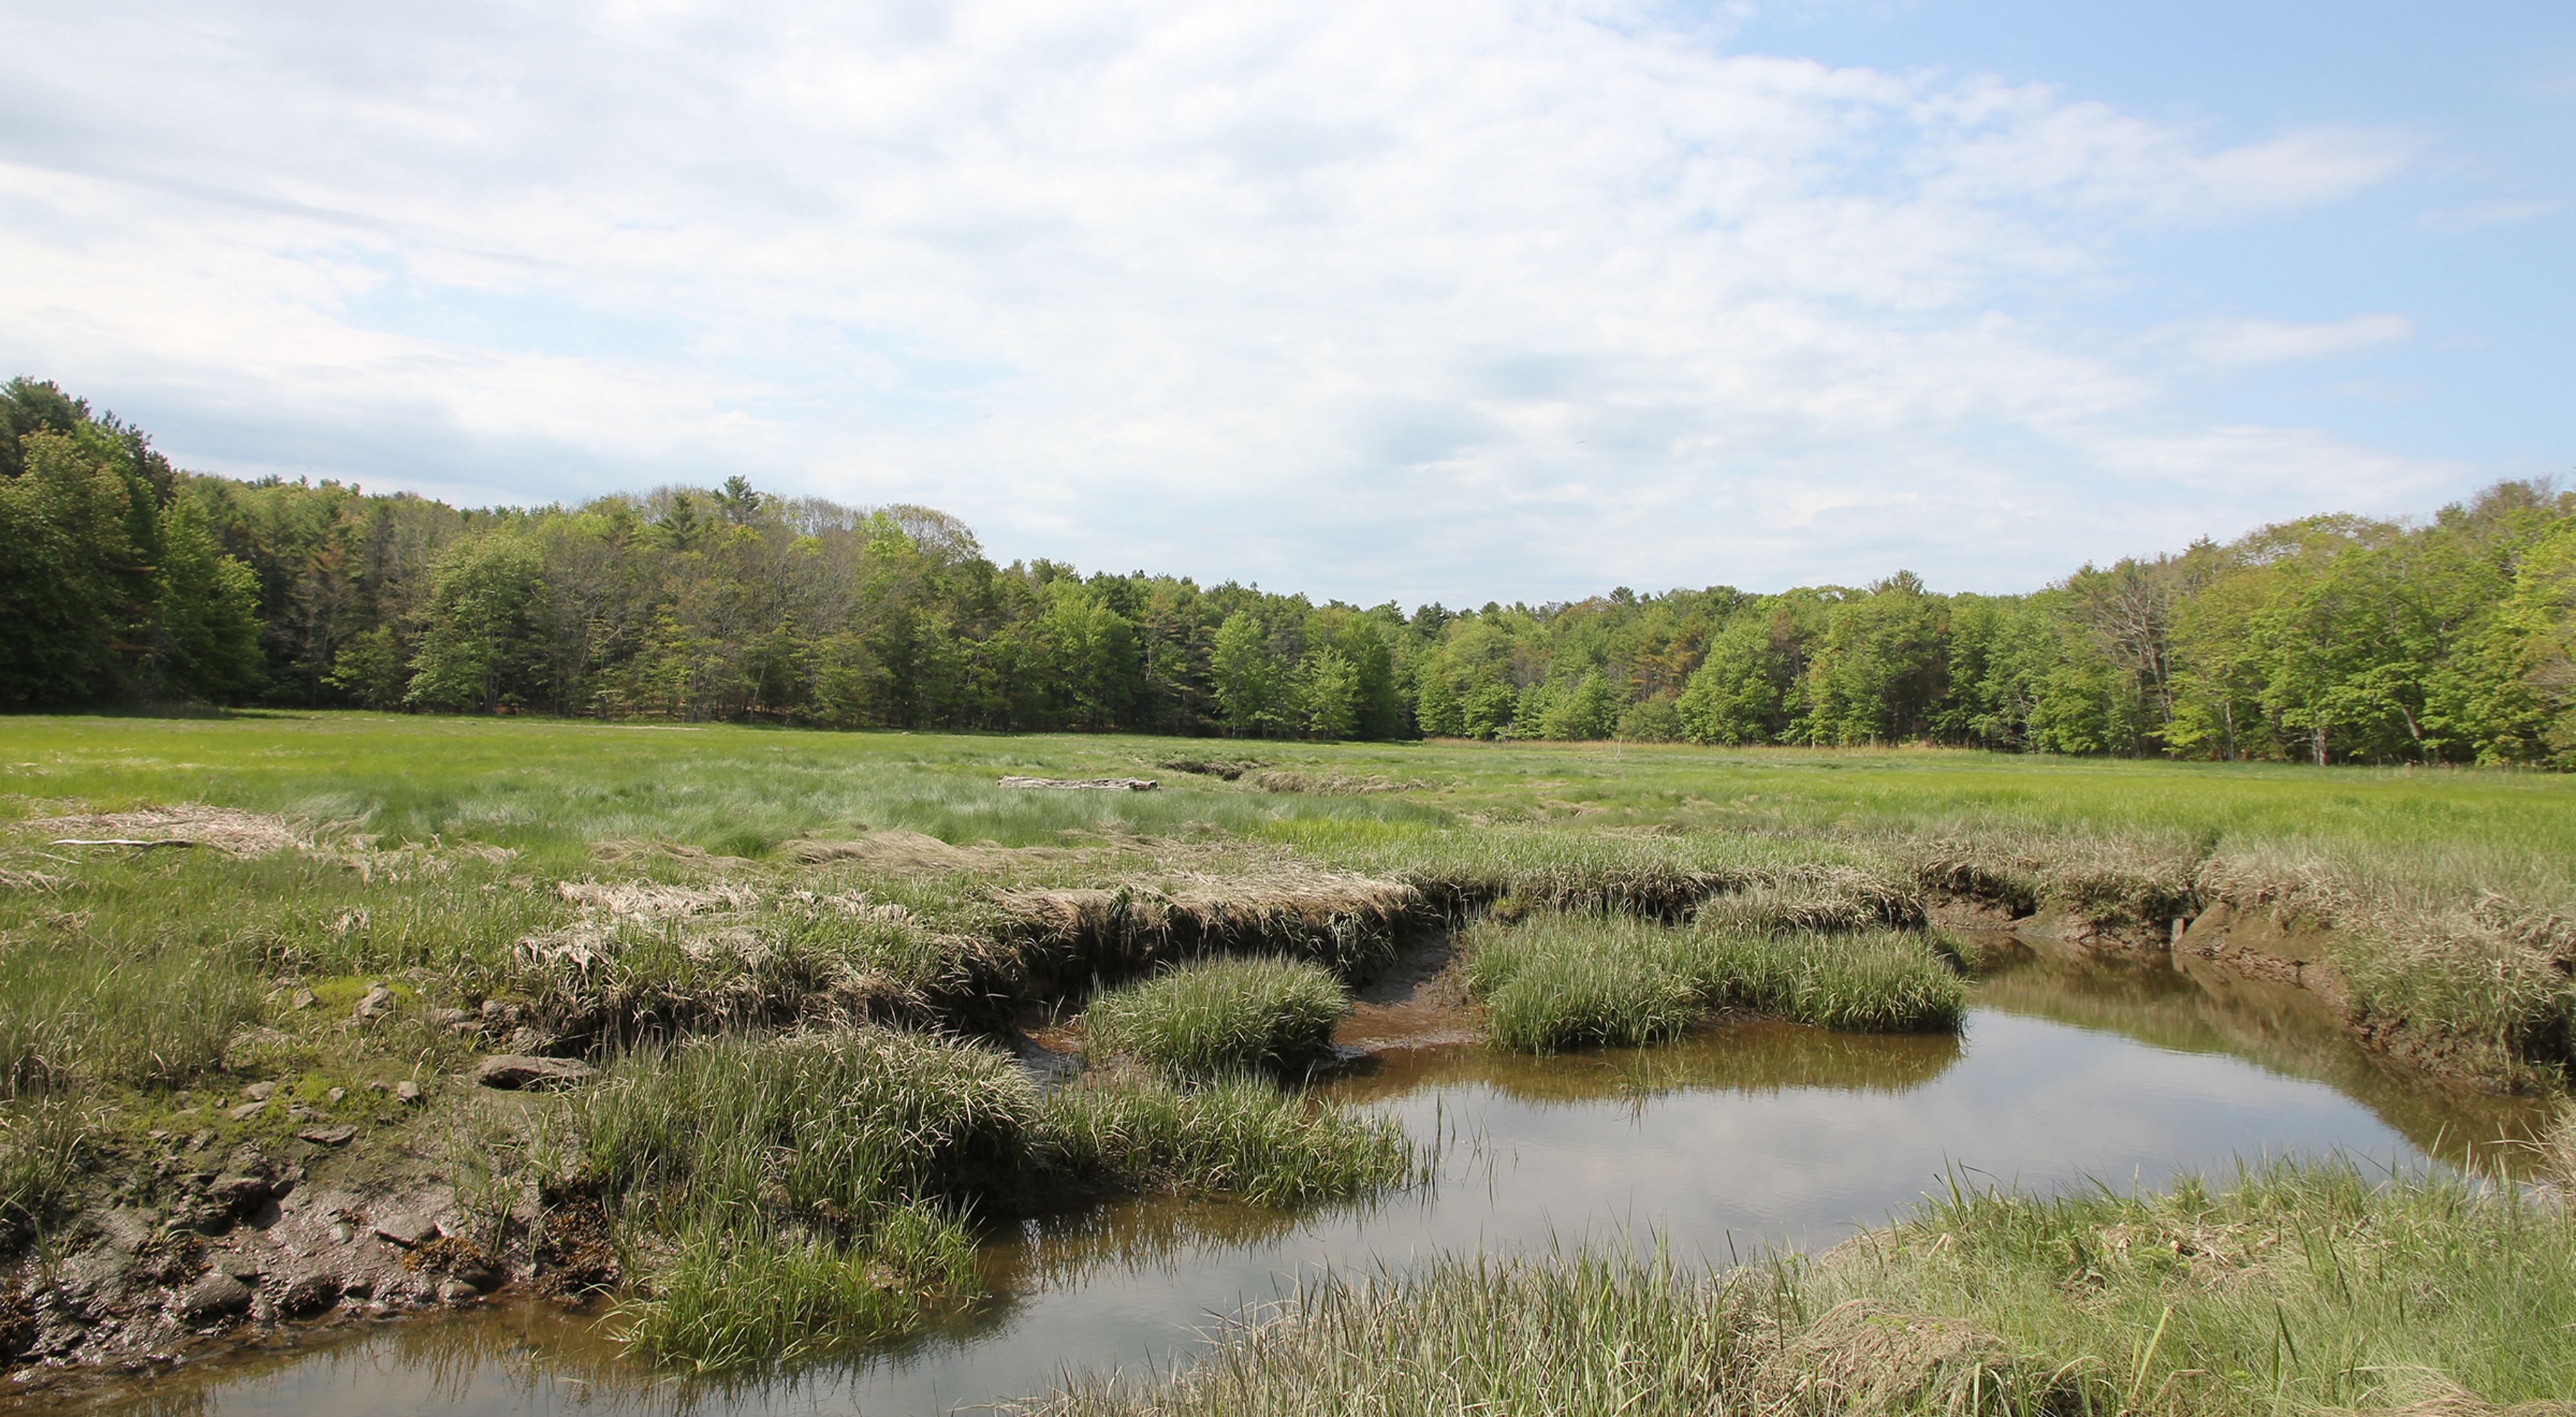 A salt marsh with clumped mud and grass and tidal ponds.